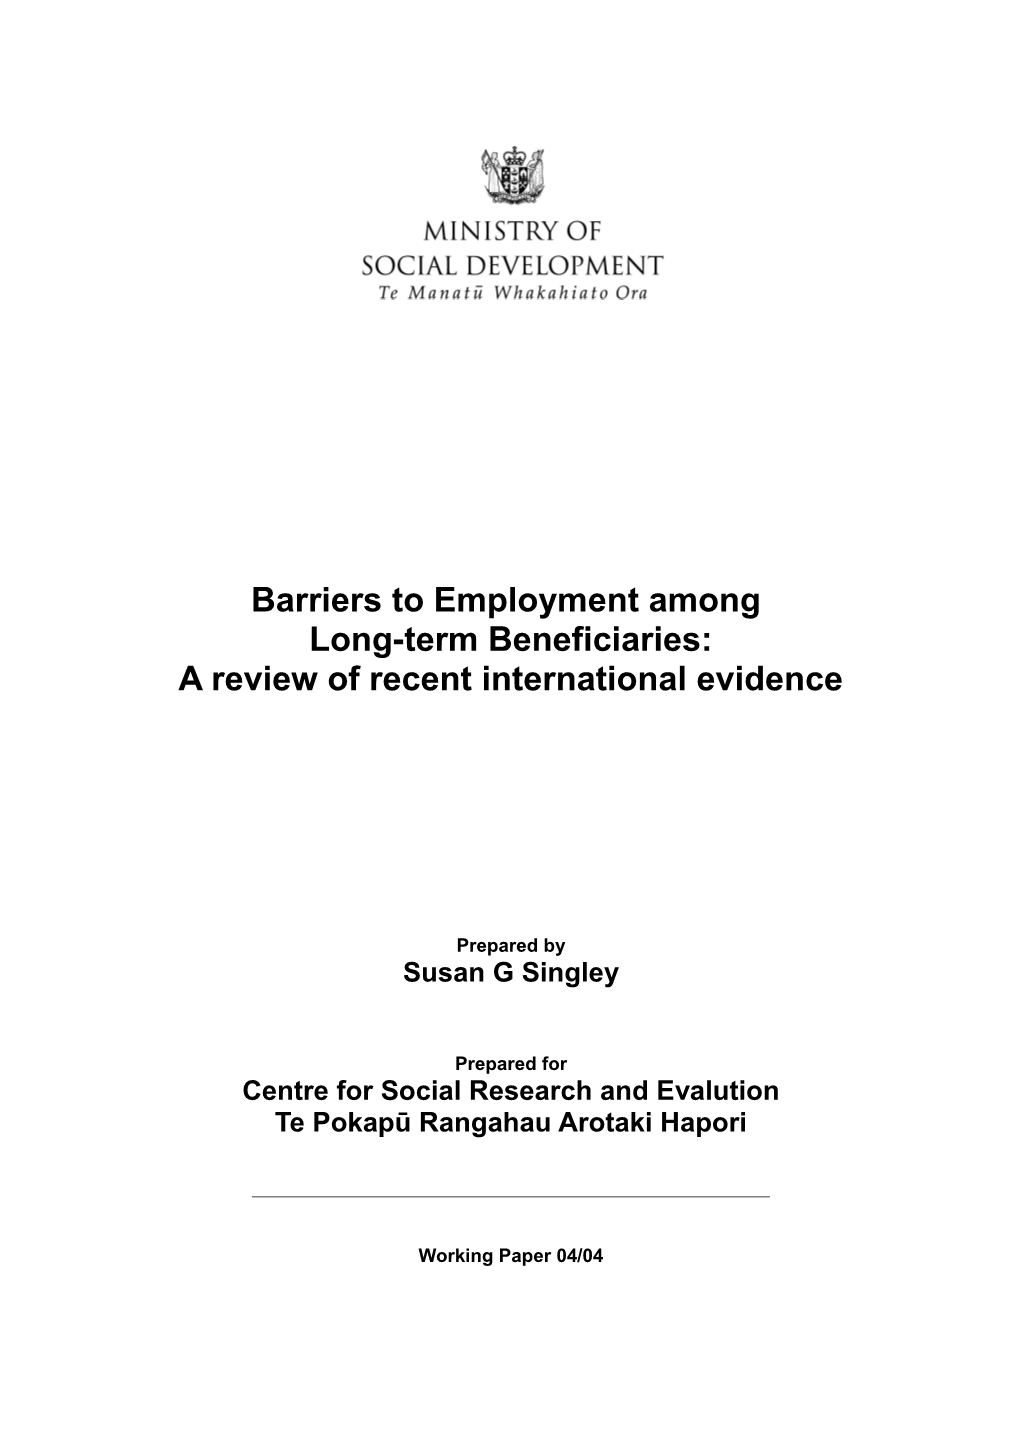 Barriers to Employment Among Long-Term Beneficiaries